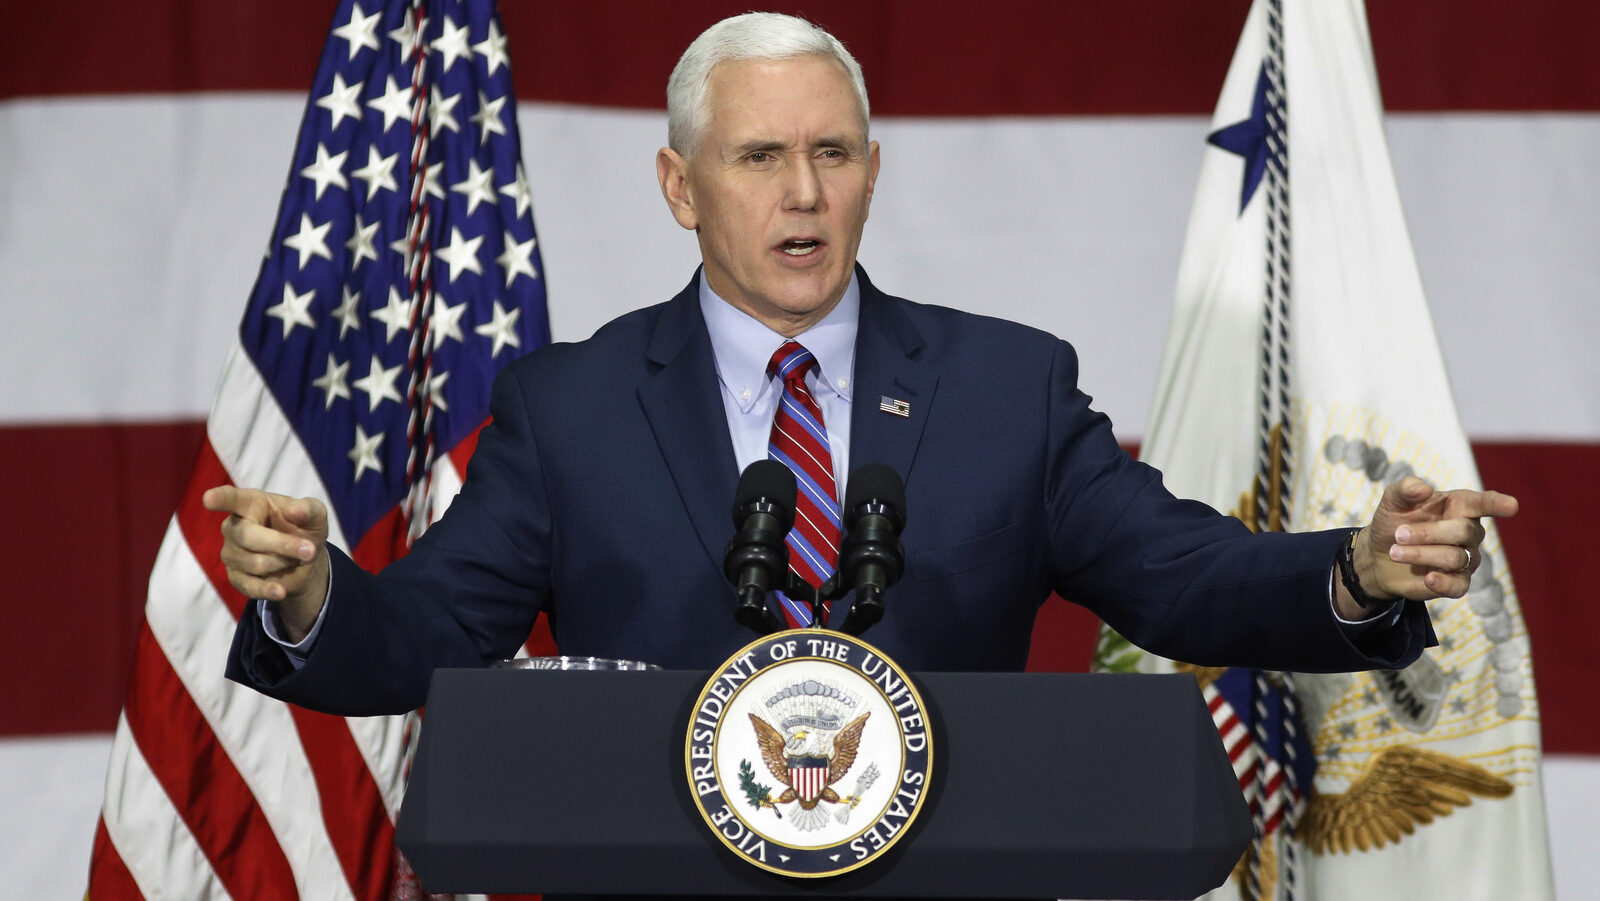 In this Saturday, April 1, 2017, photo, Vice President Mike Pence speaks at DynaLab, Inc. in Reynoldsburg, Ohio. Pence and a few other White House officials made a new offer to conservative House Republicans late Monday on the GOP's failed health care bill, hoping to resuscitate a measure that crashed spectacularly less than two weeks ago. (AP/John Minchillo)